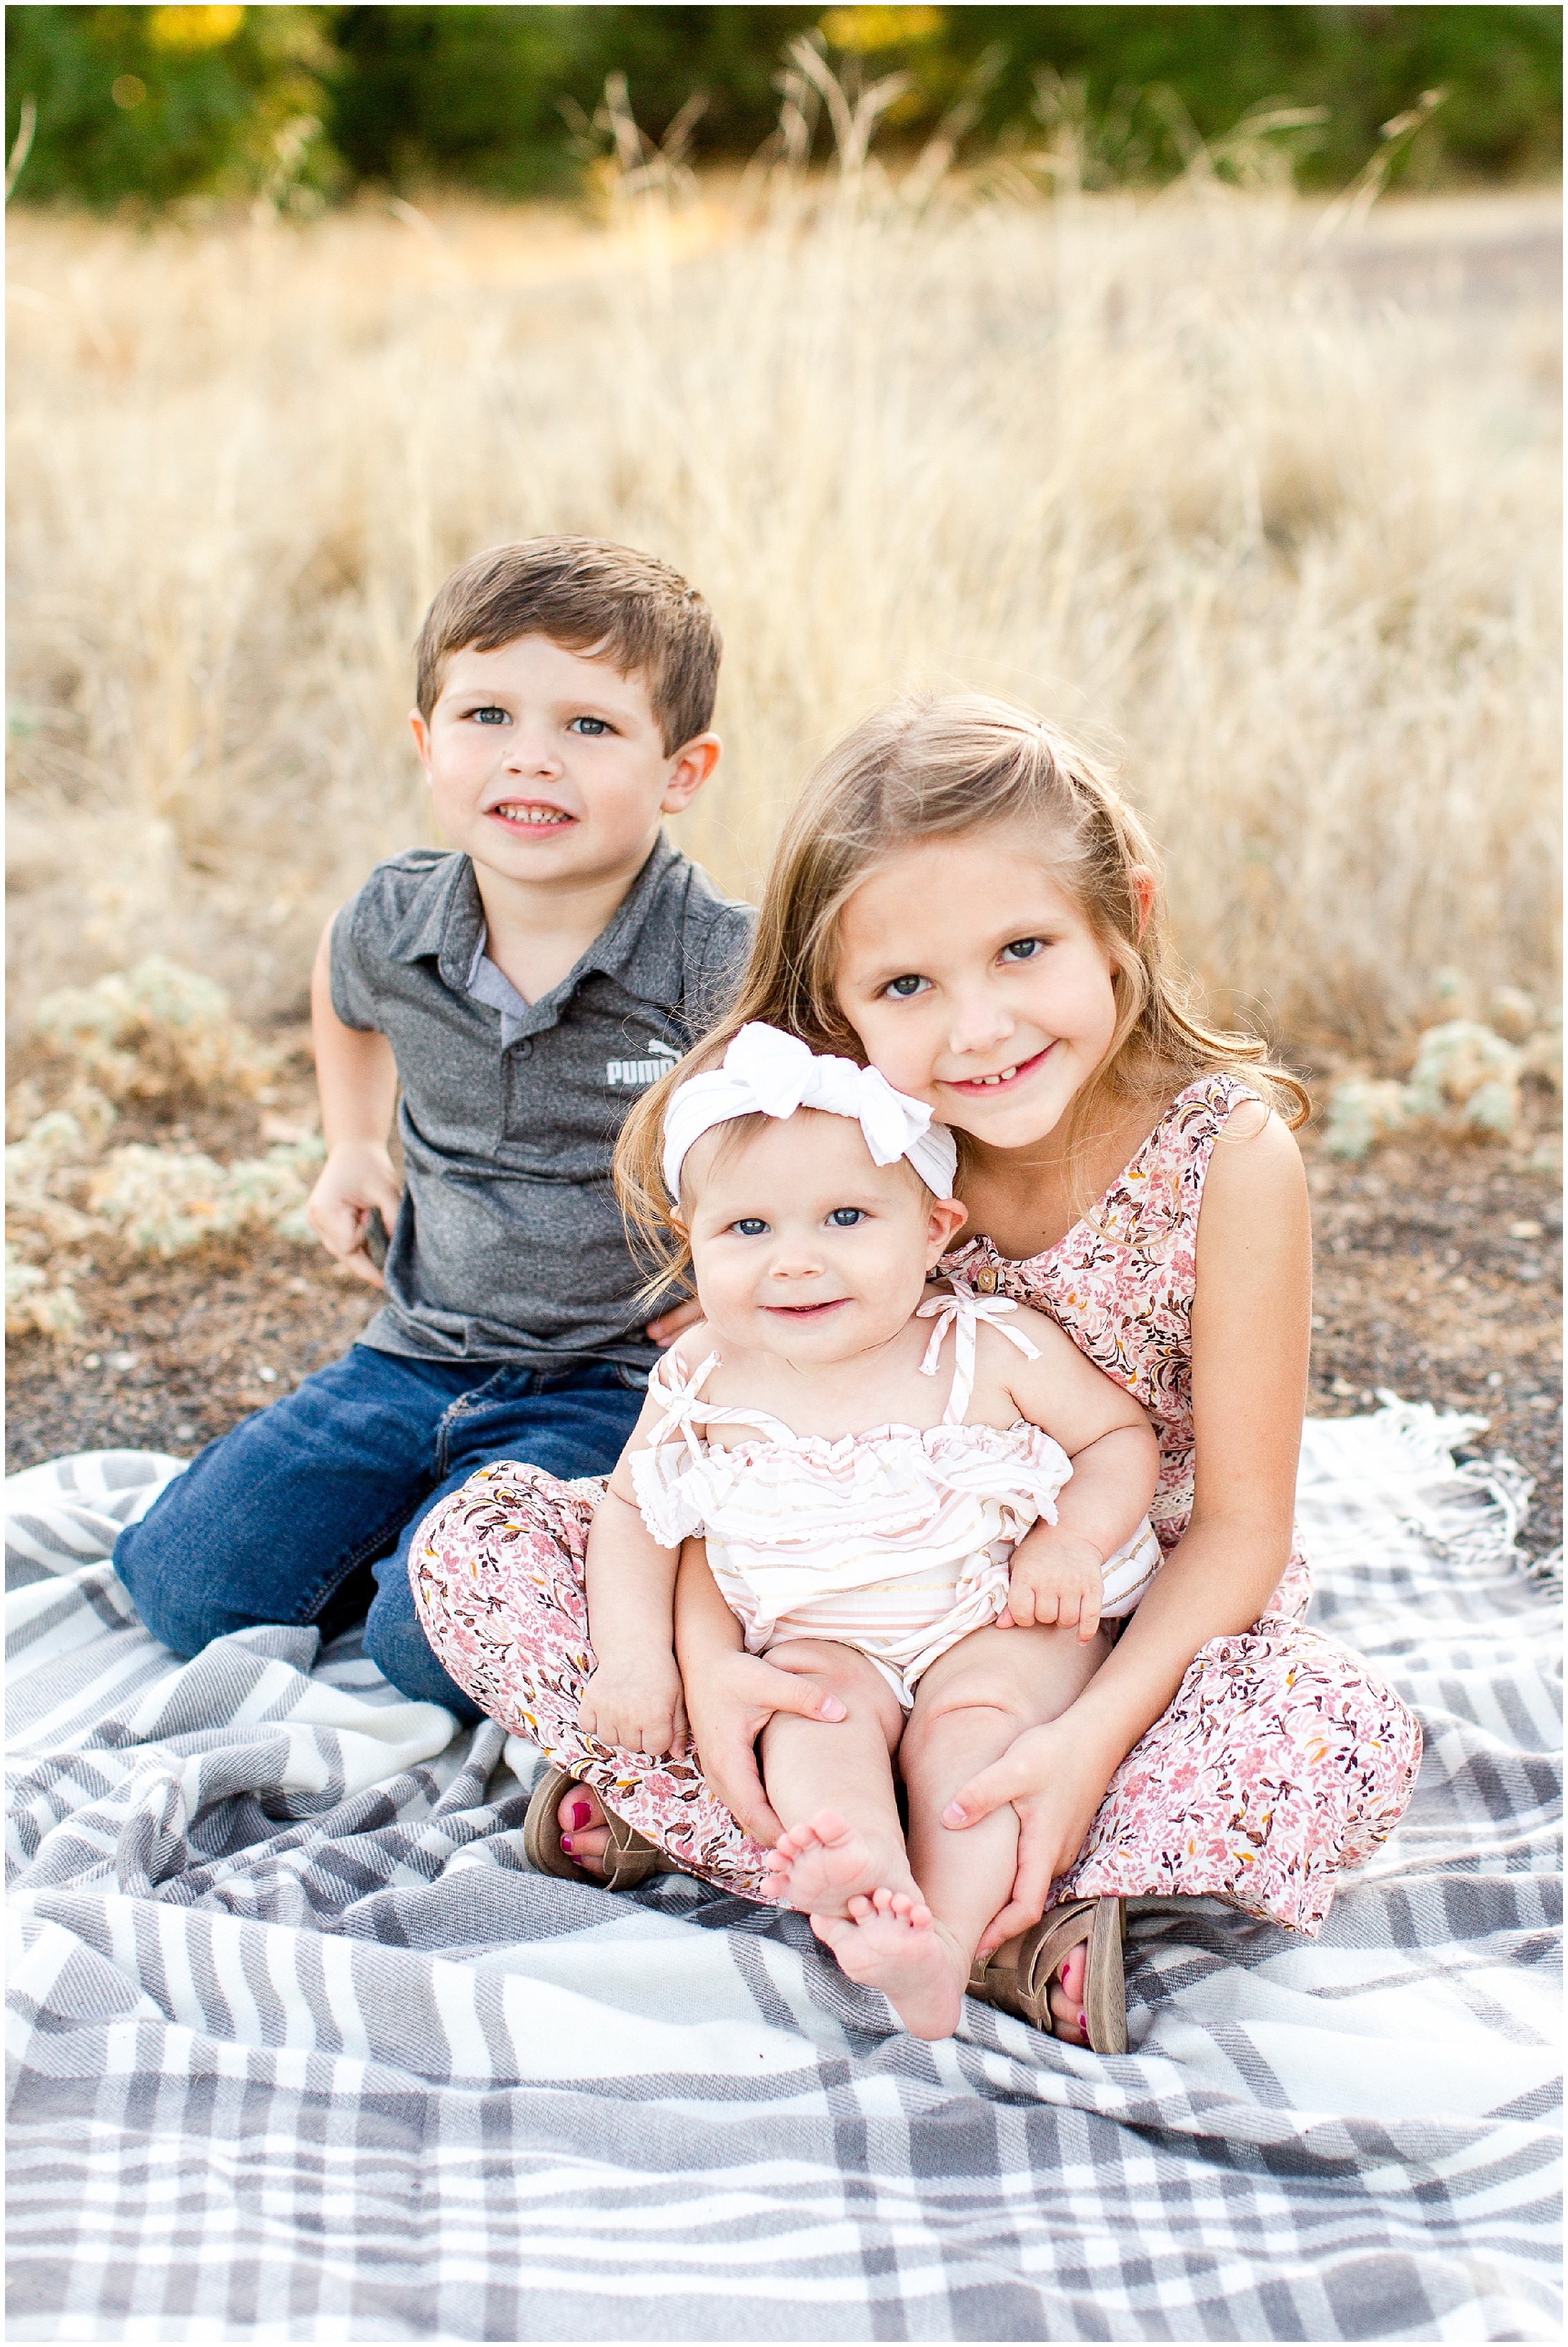 Romantic Grassy Fields Family Portrait Session at Sunset Chico California,